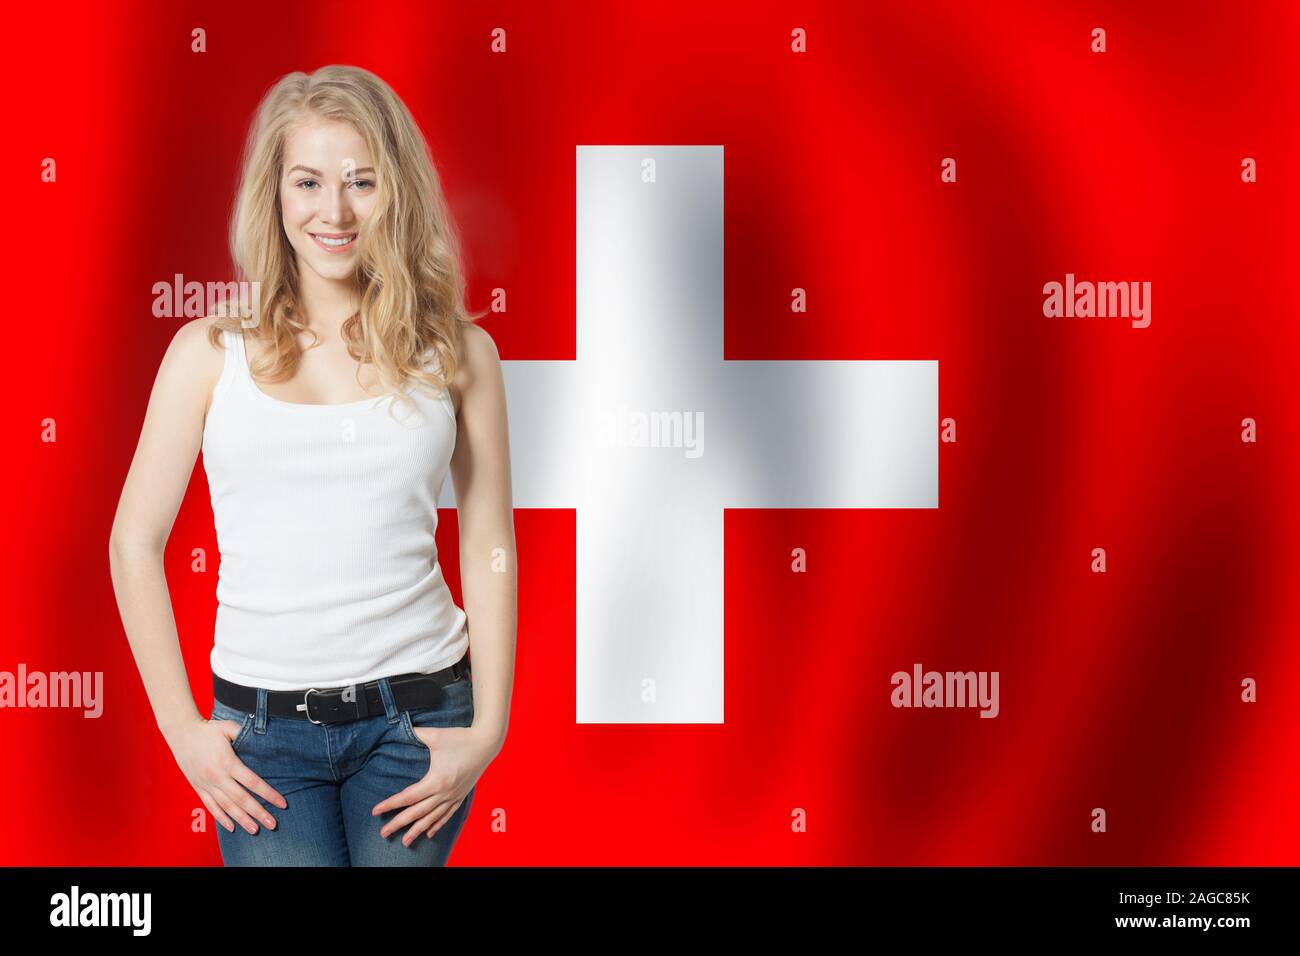 Swiss Flag Woman High Resolution Stock Photography and Images - Alamy